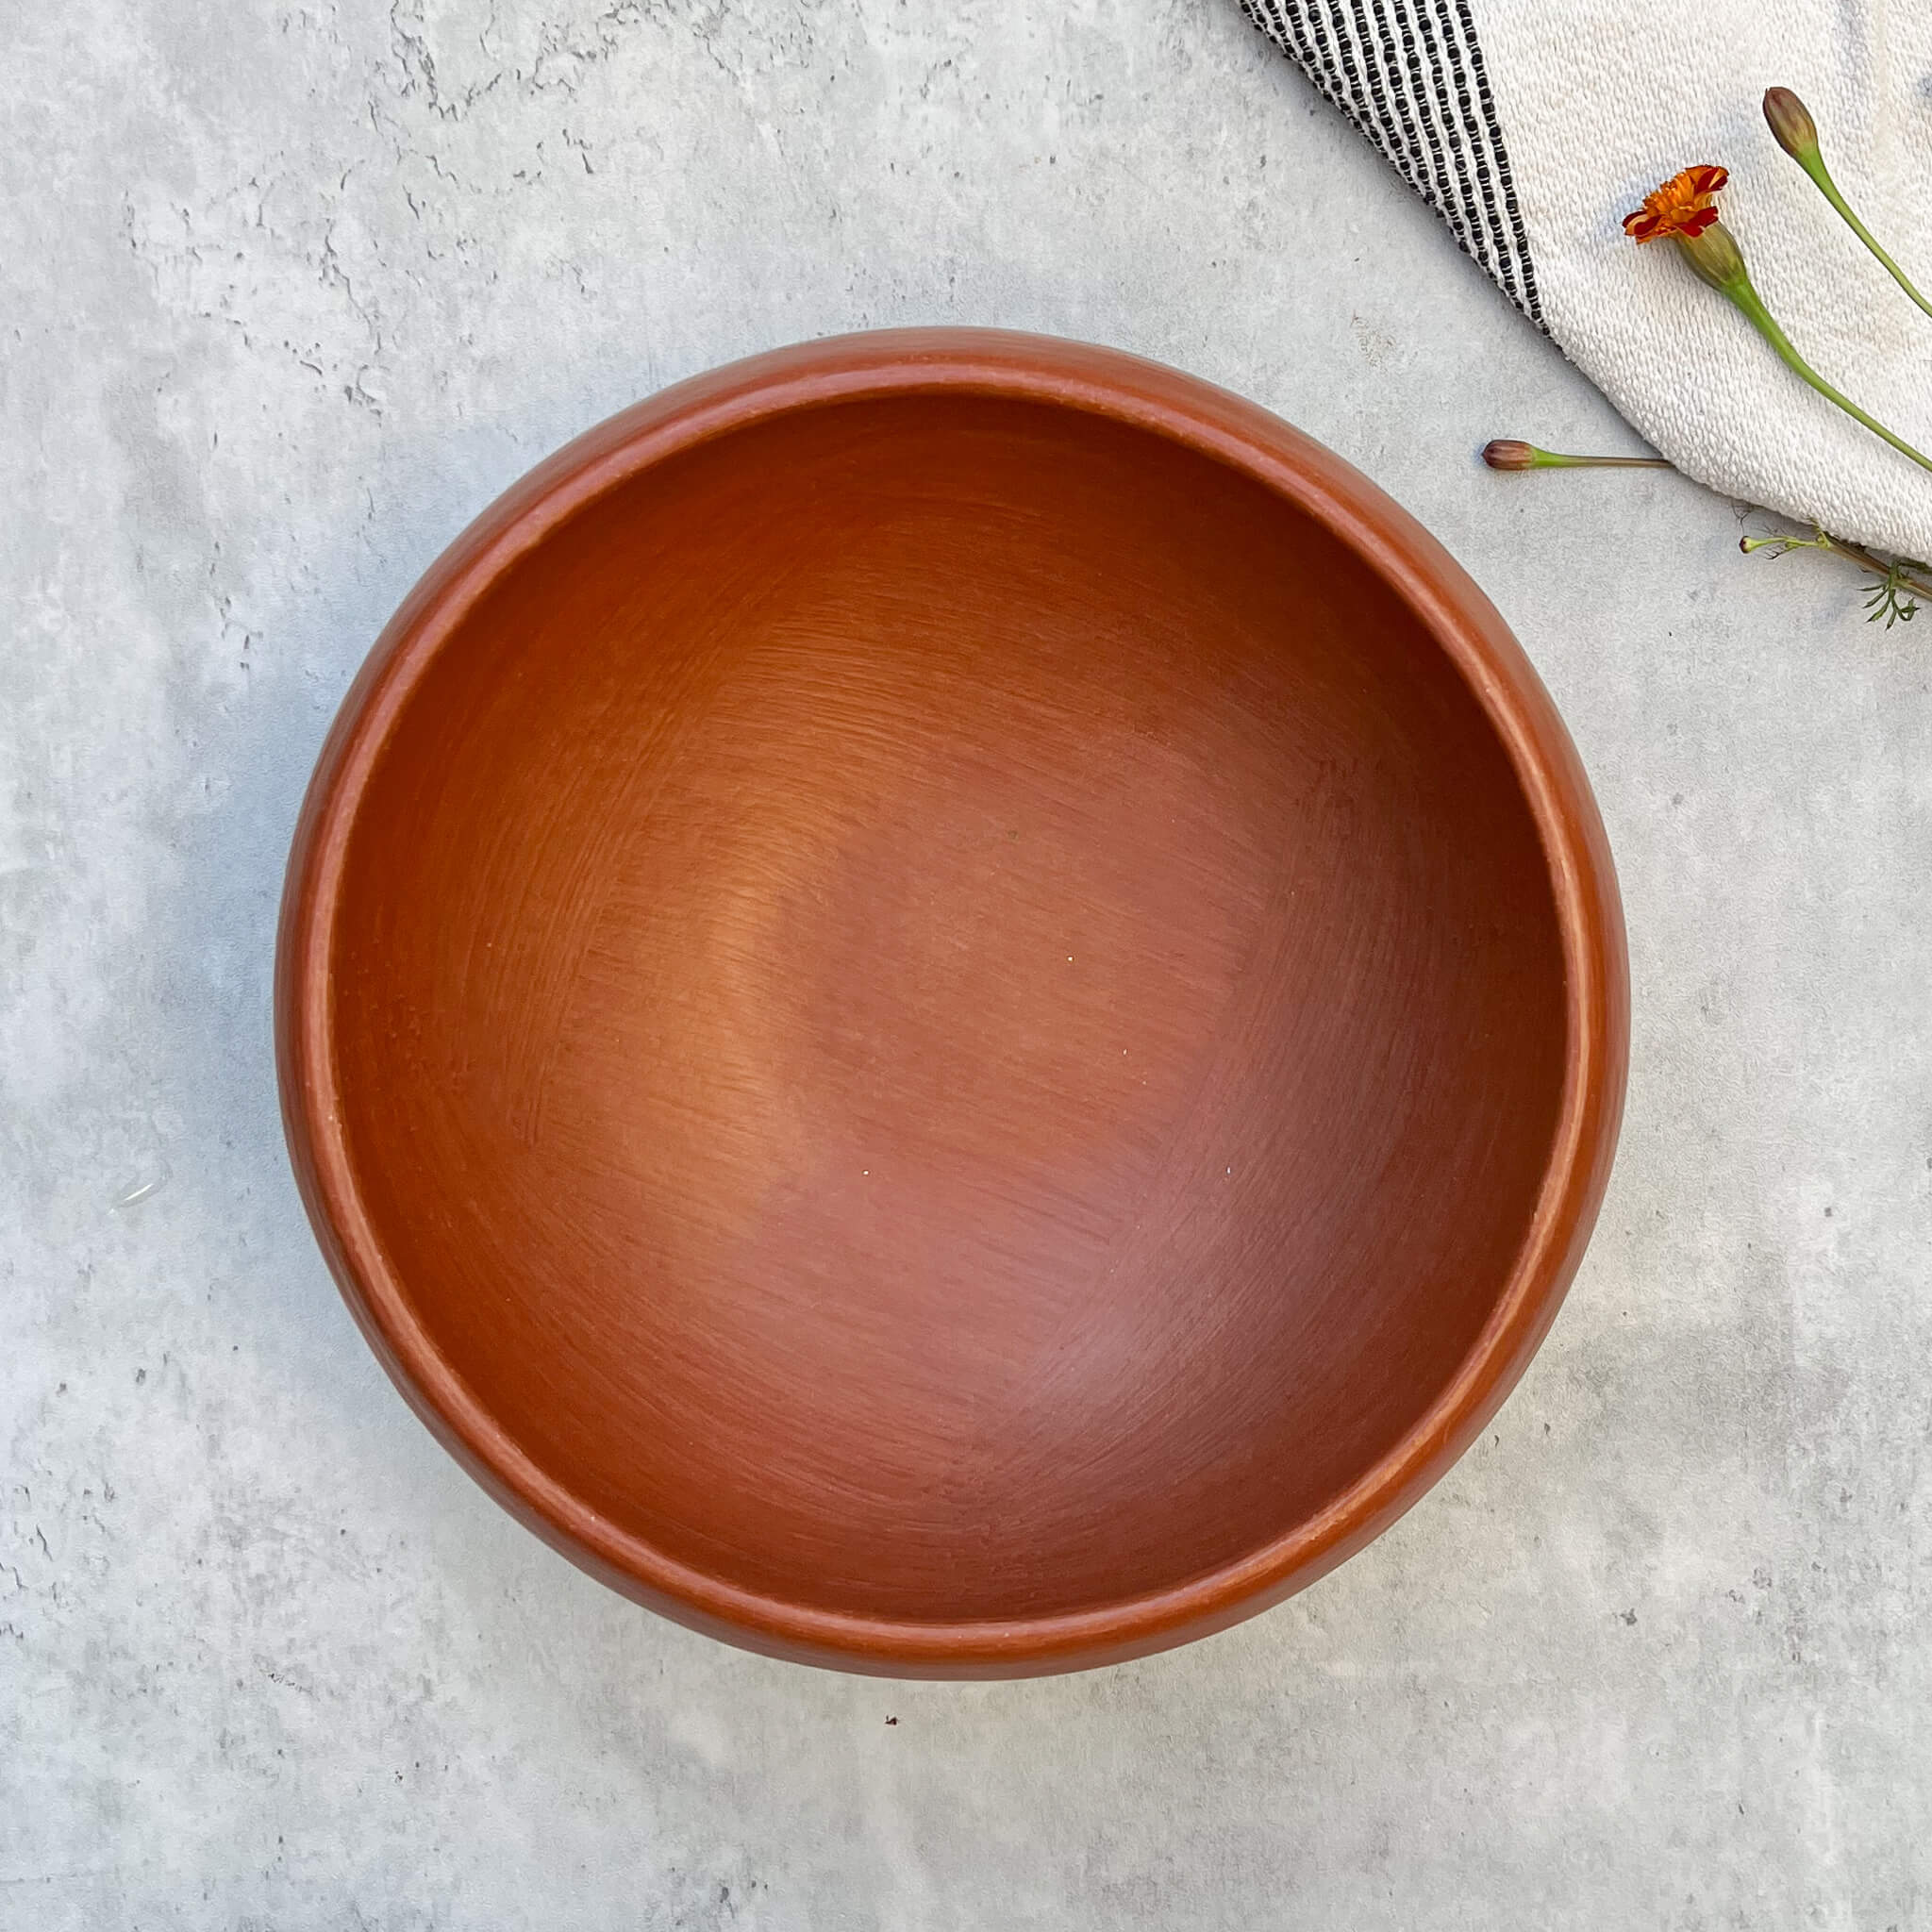 Large Oaxaca red clay bowl.